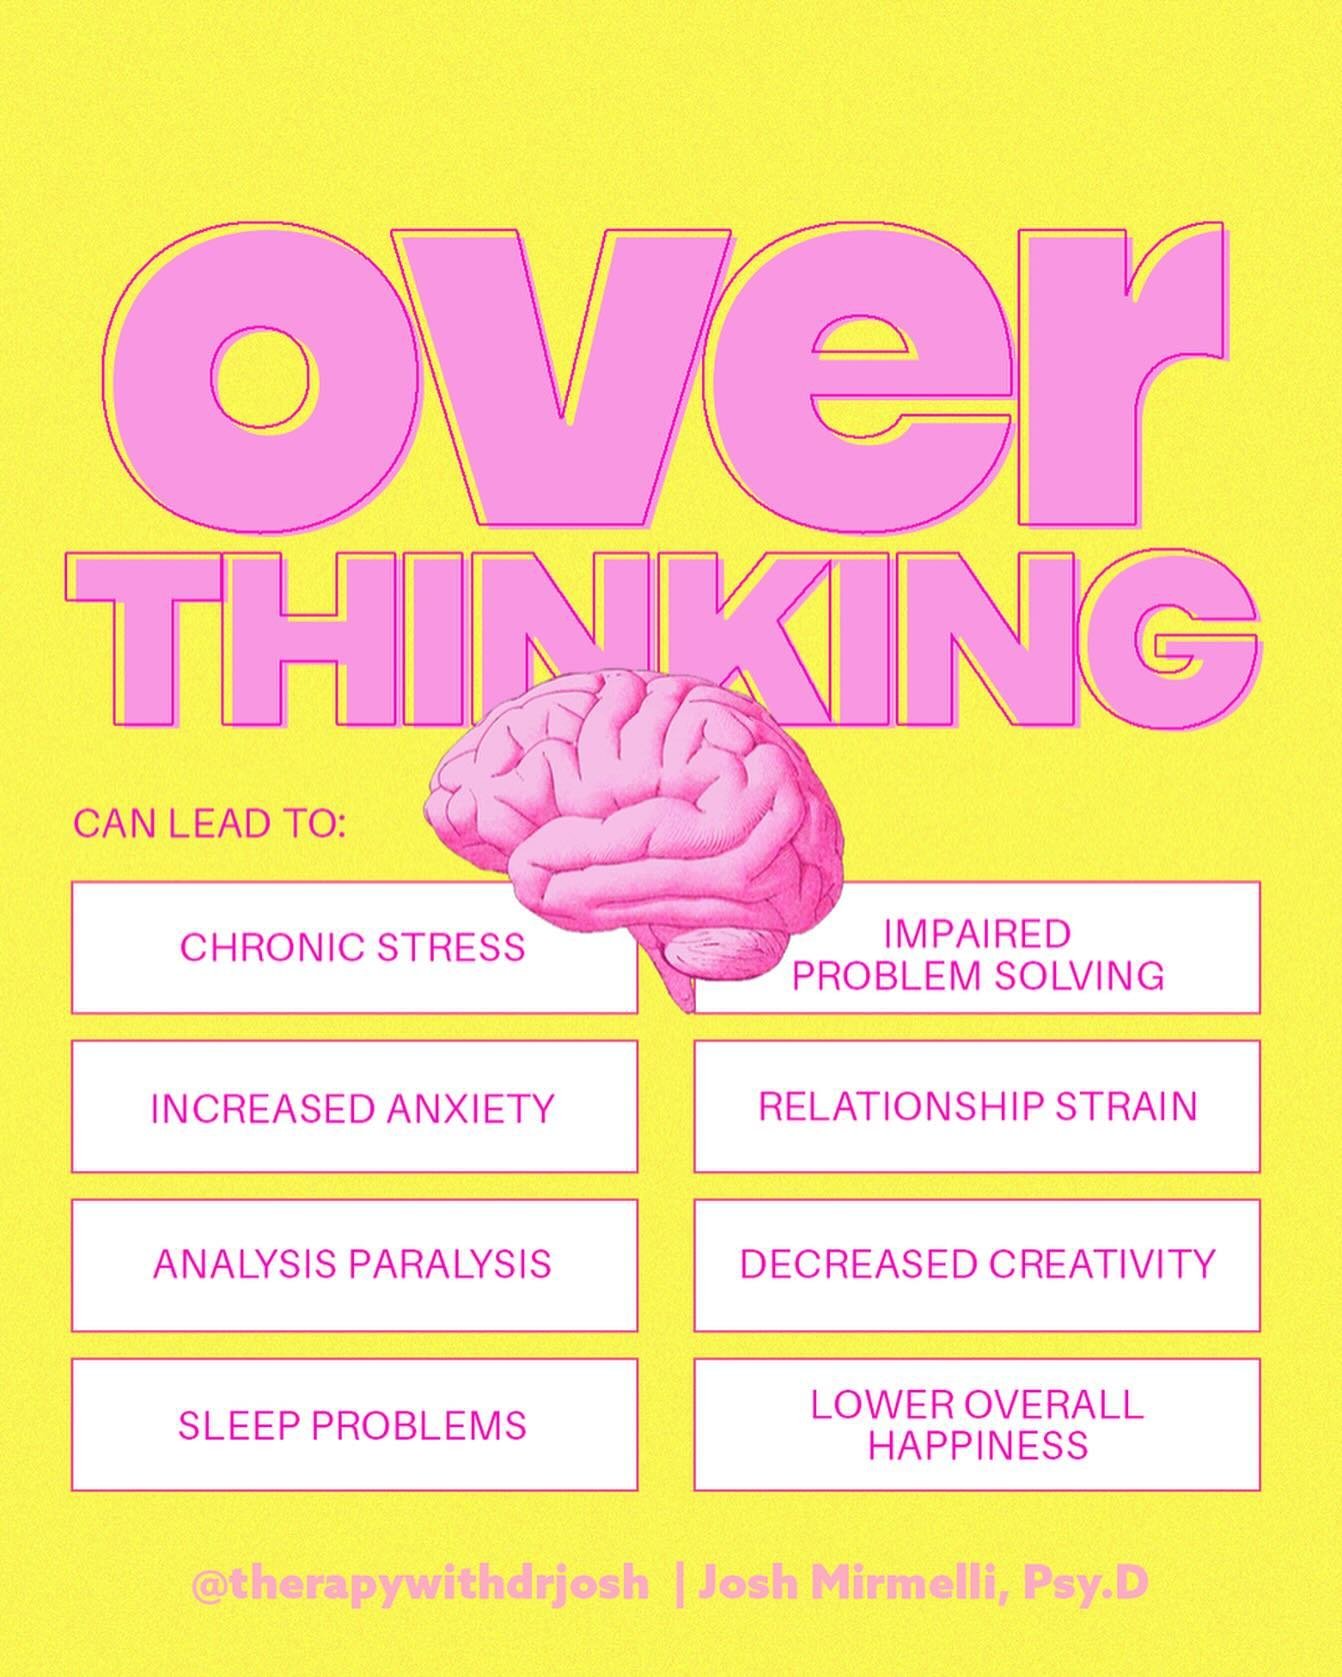 For some (actually, for many!), overthinking can be like mental quicksand&mdash;the more you struggle, the deeper you sink. 

When we learn to recognize the signs of overthinking&mdash;the racing thoughts, replaying the past, and excessive &lsquo;wha